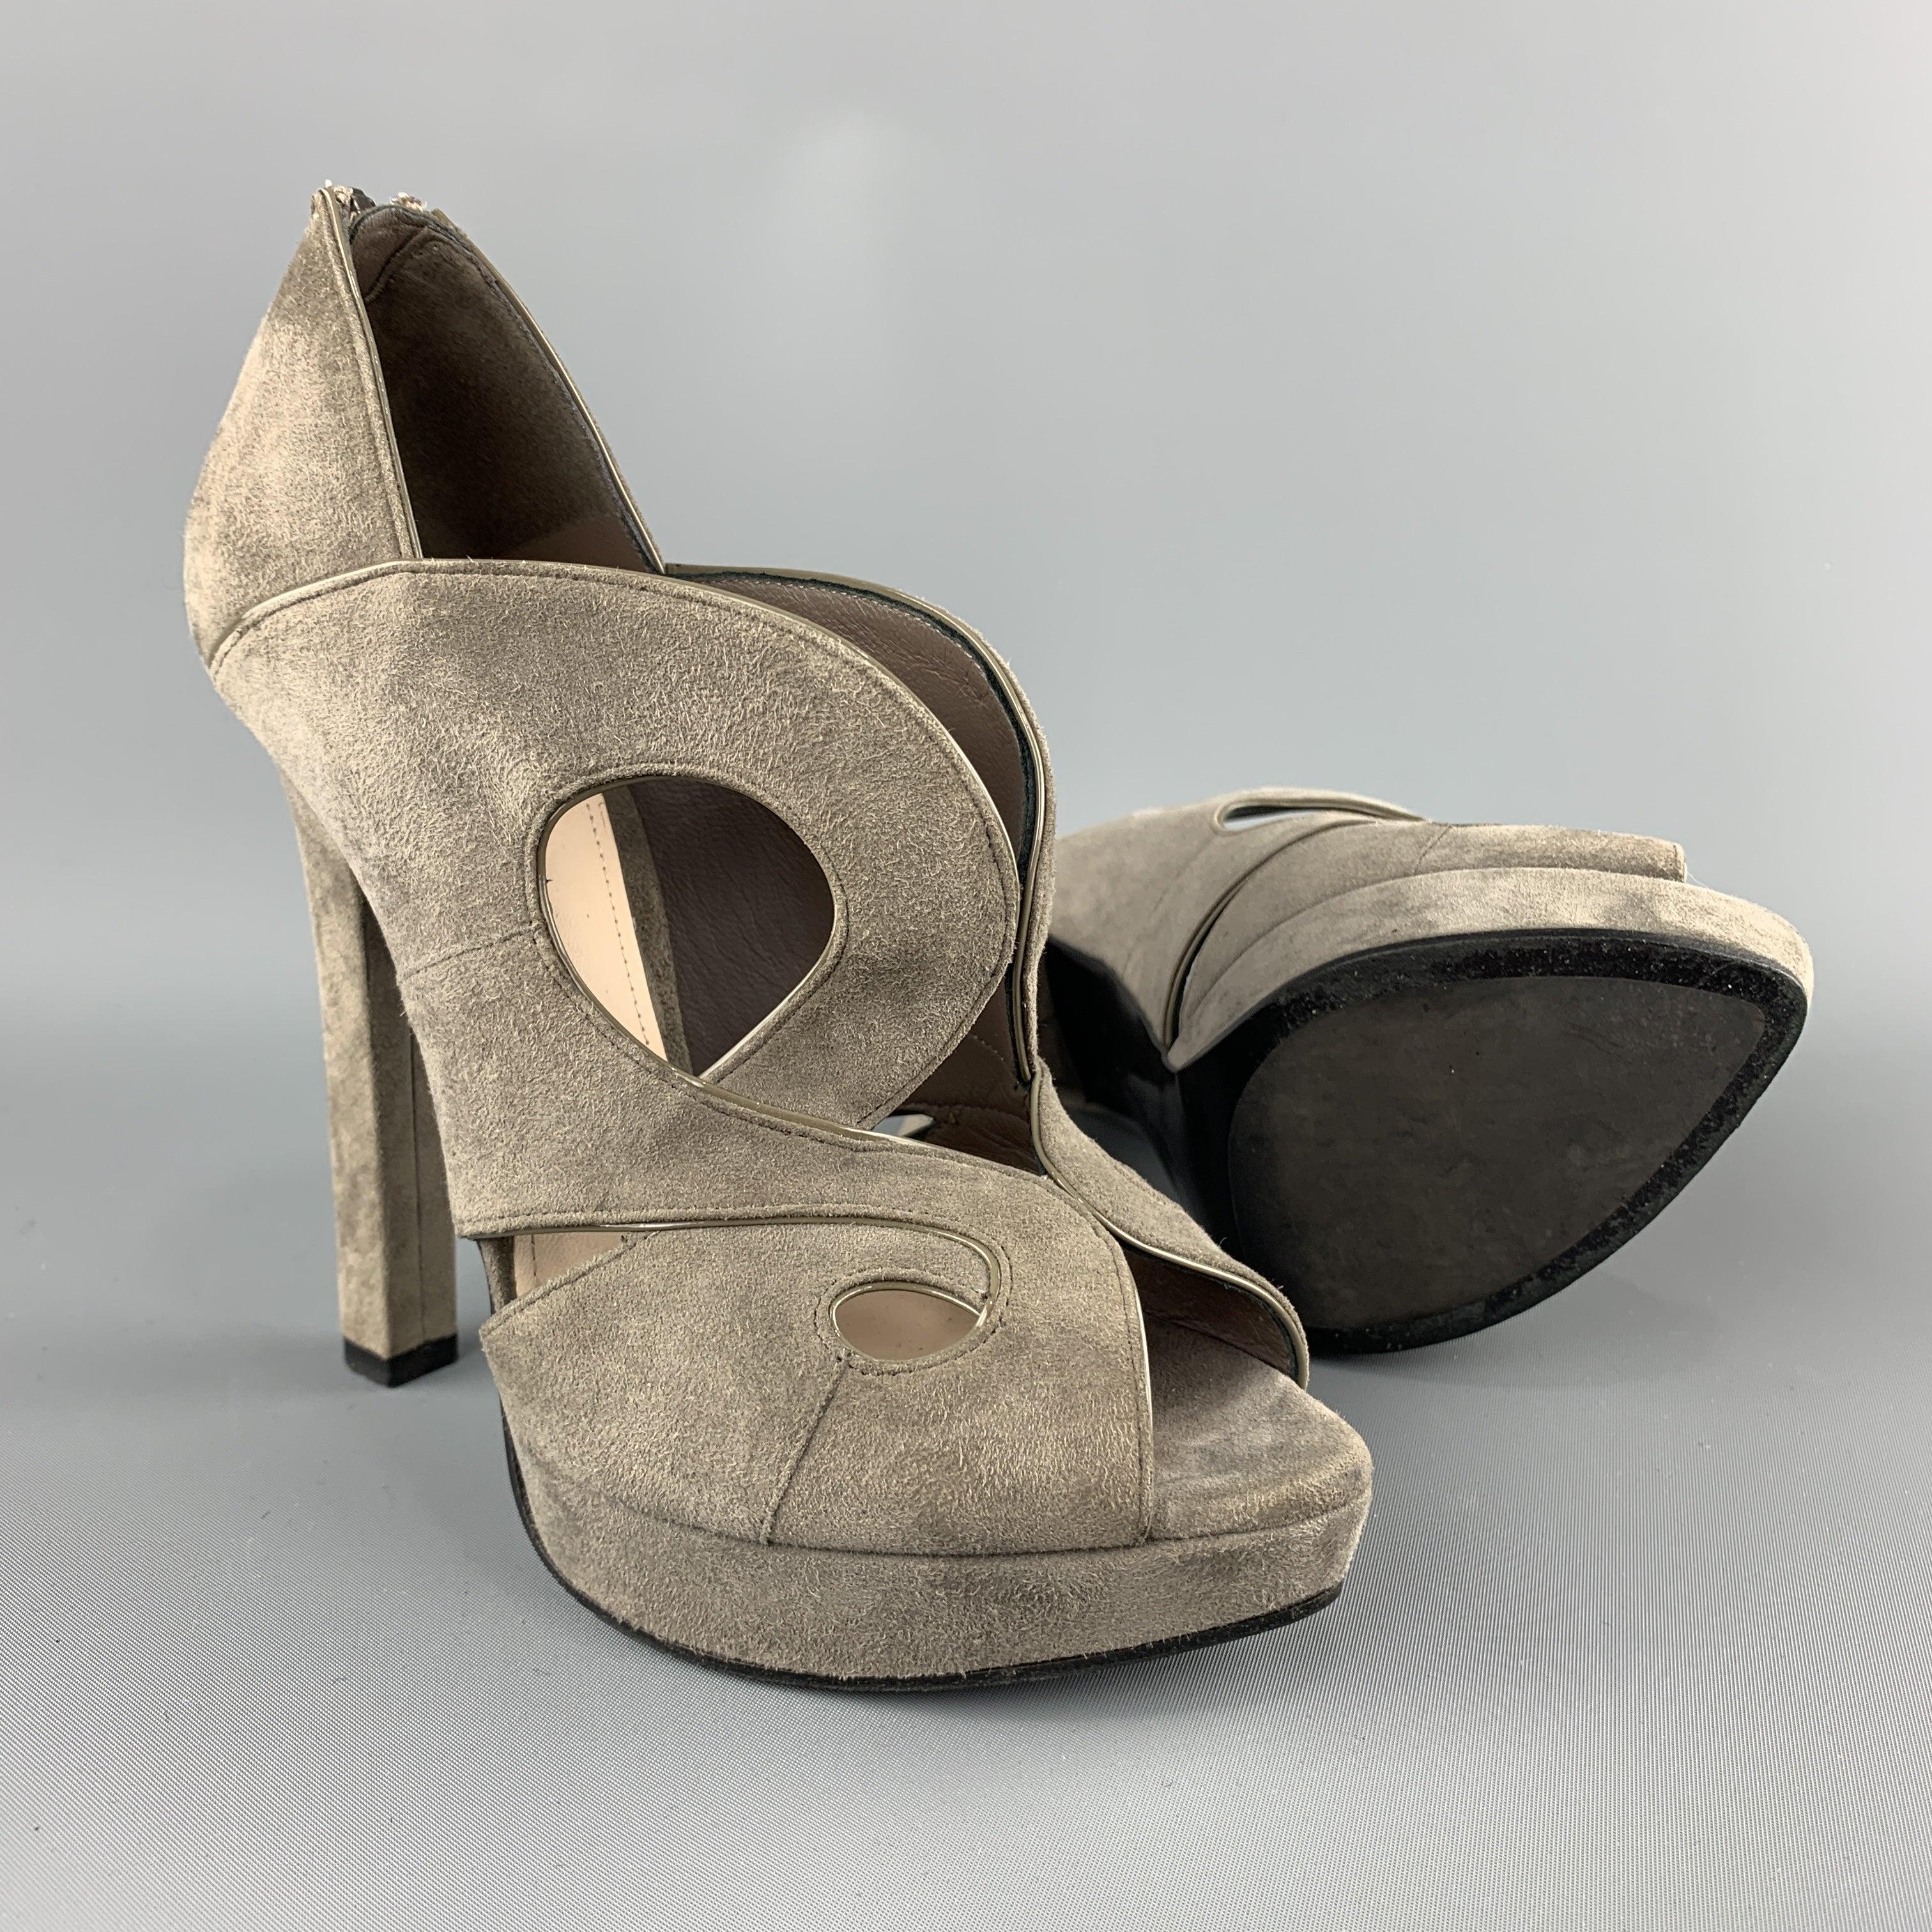 BOTTEGA VENETA Size 7 Grey Suede Patent Leather Piping Peep Toe Sandals In Good Condition For Sale In San Francisco, CA